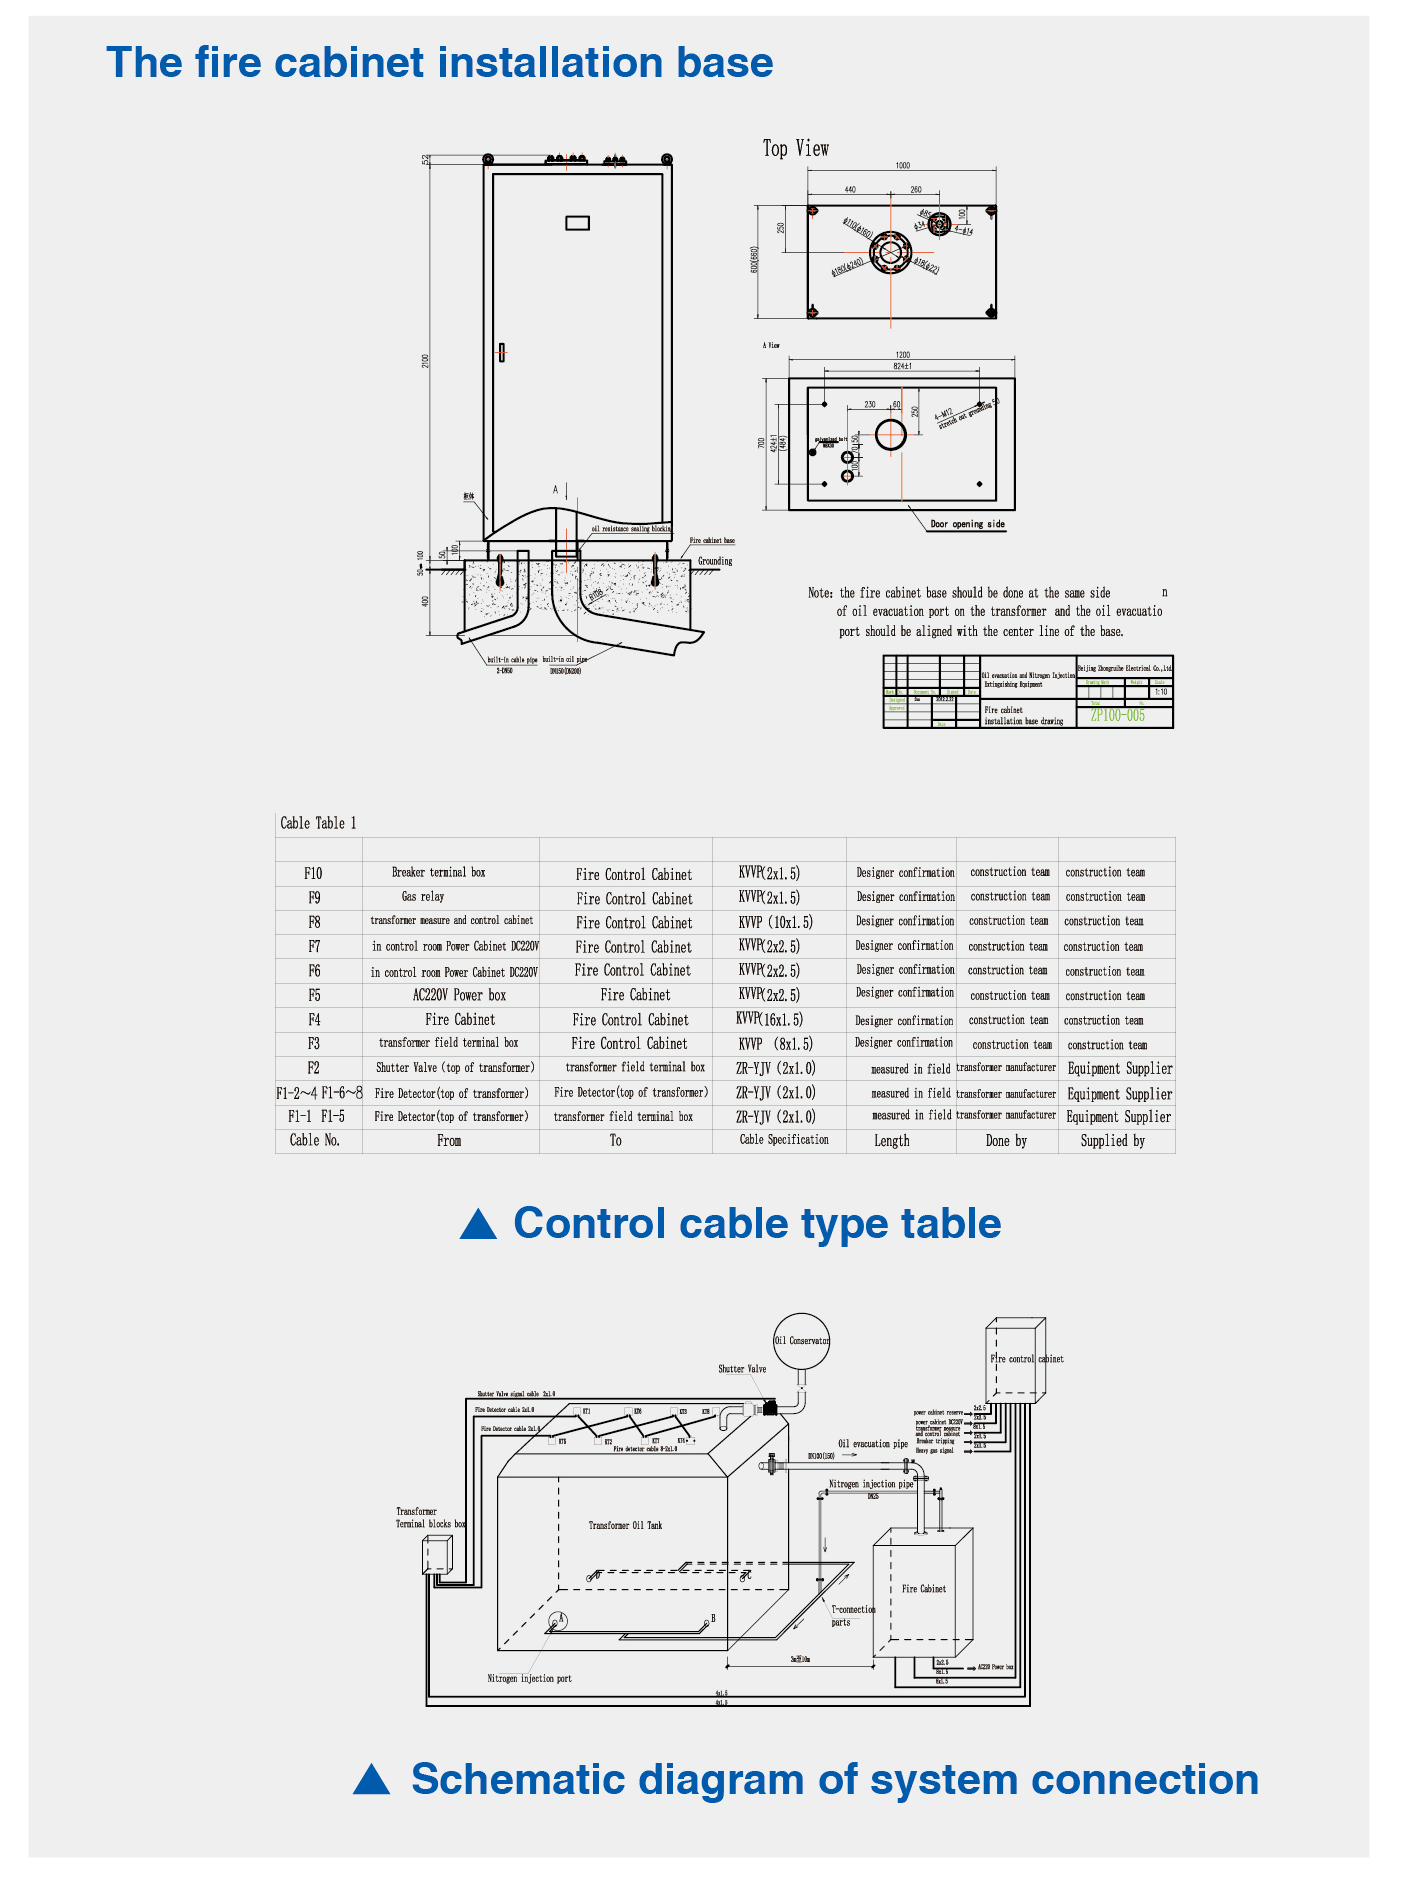 Oil Evacuation and Nitrogen Injection Extinguishing Equipment for Oil-immersed Transformer